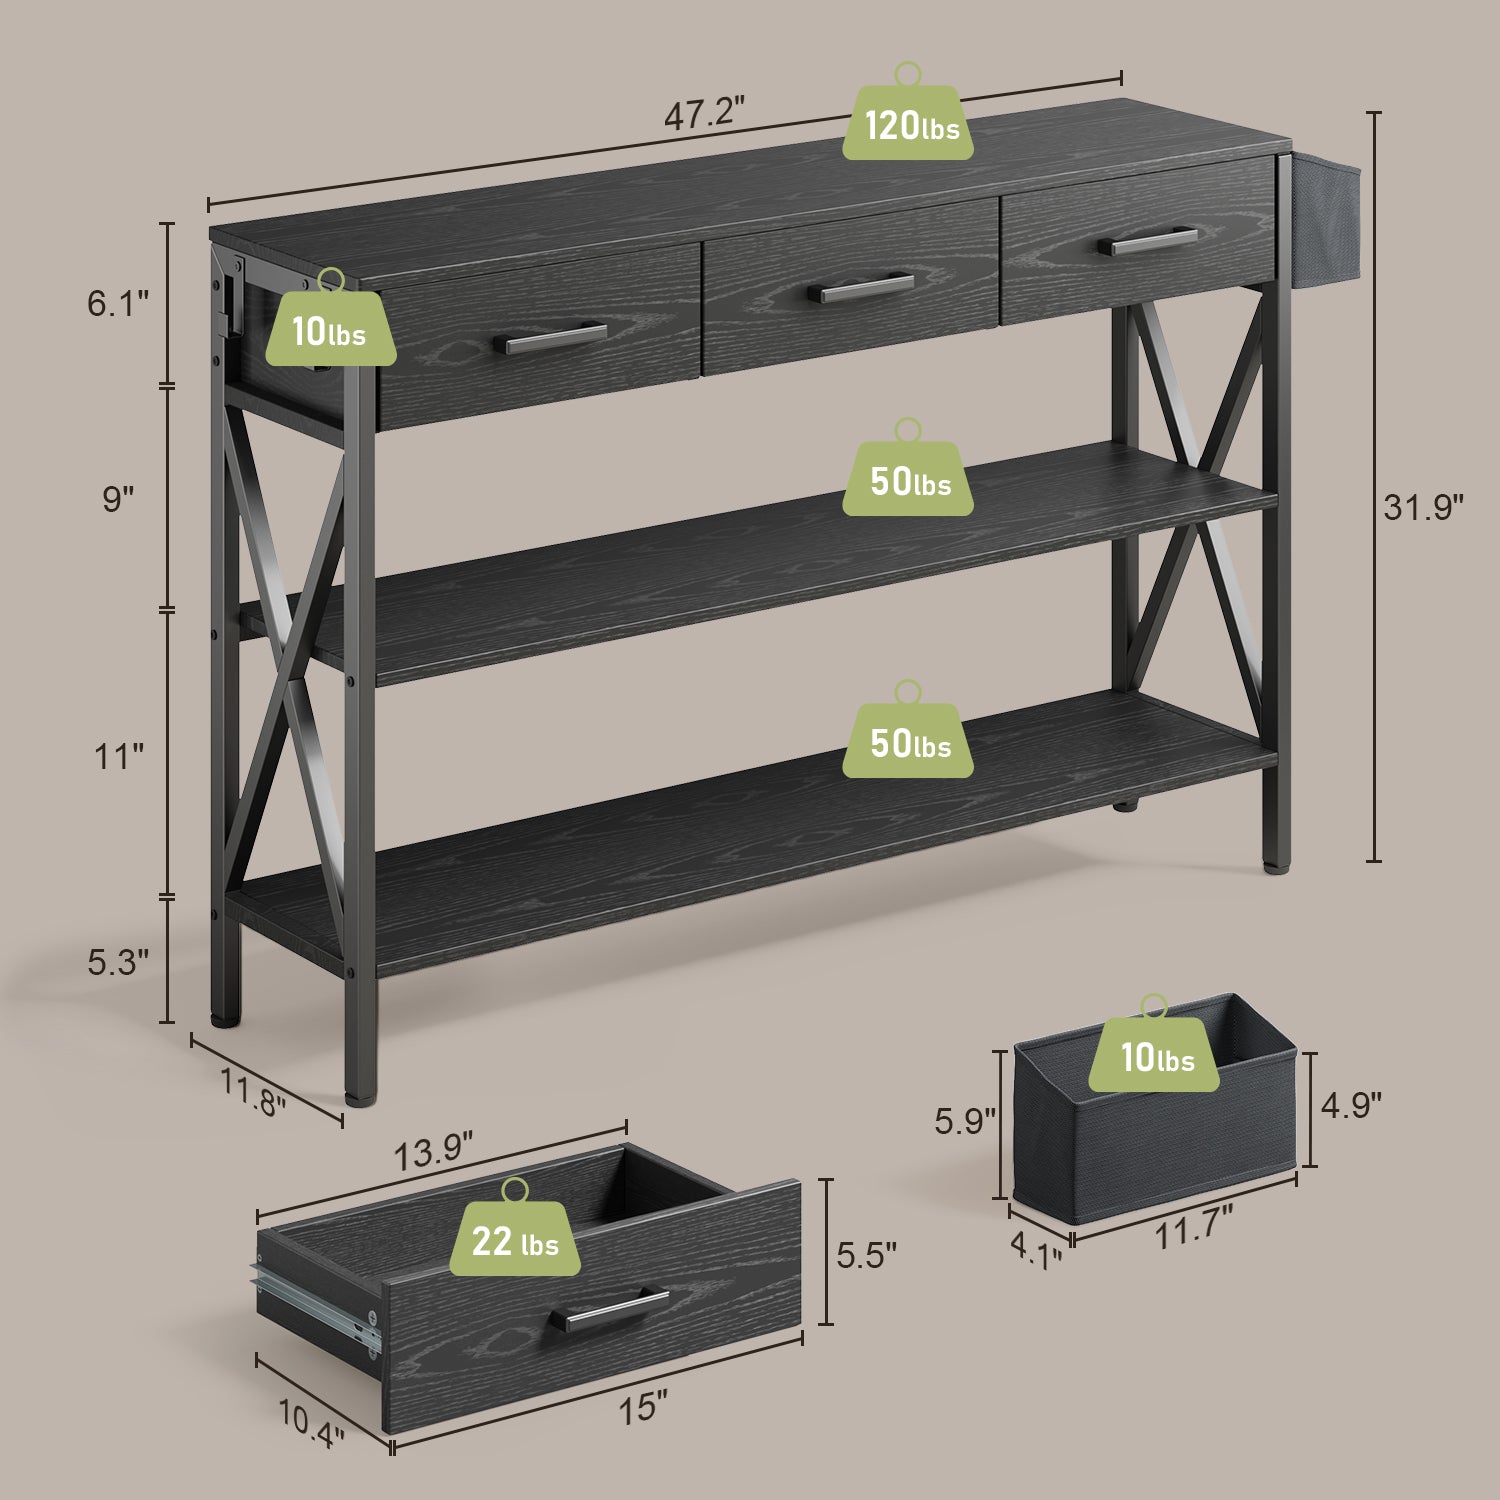 Gizoon FS30 Versatility Table with 2 Drawers & 3 Tier Storage Shelves